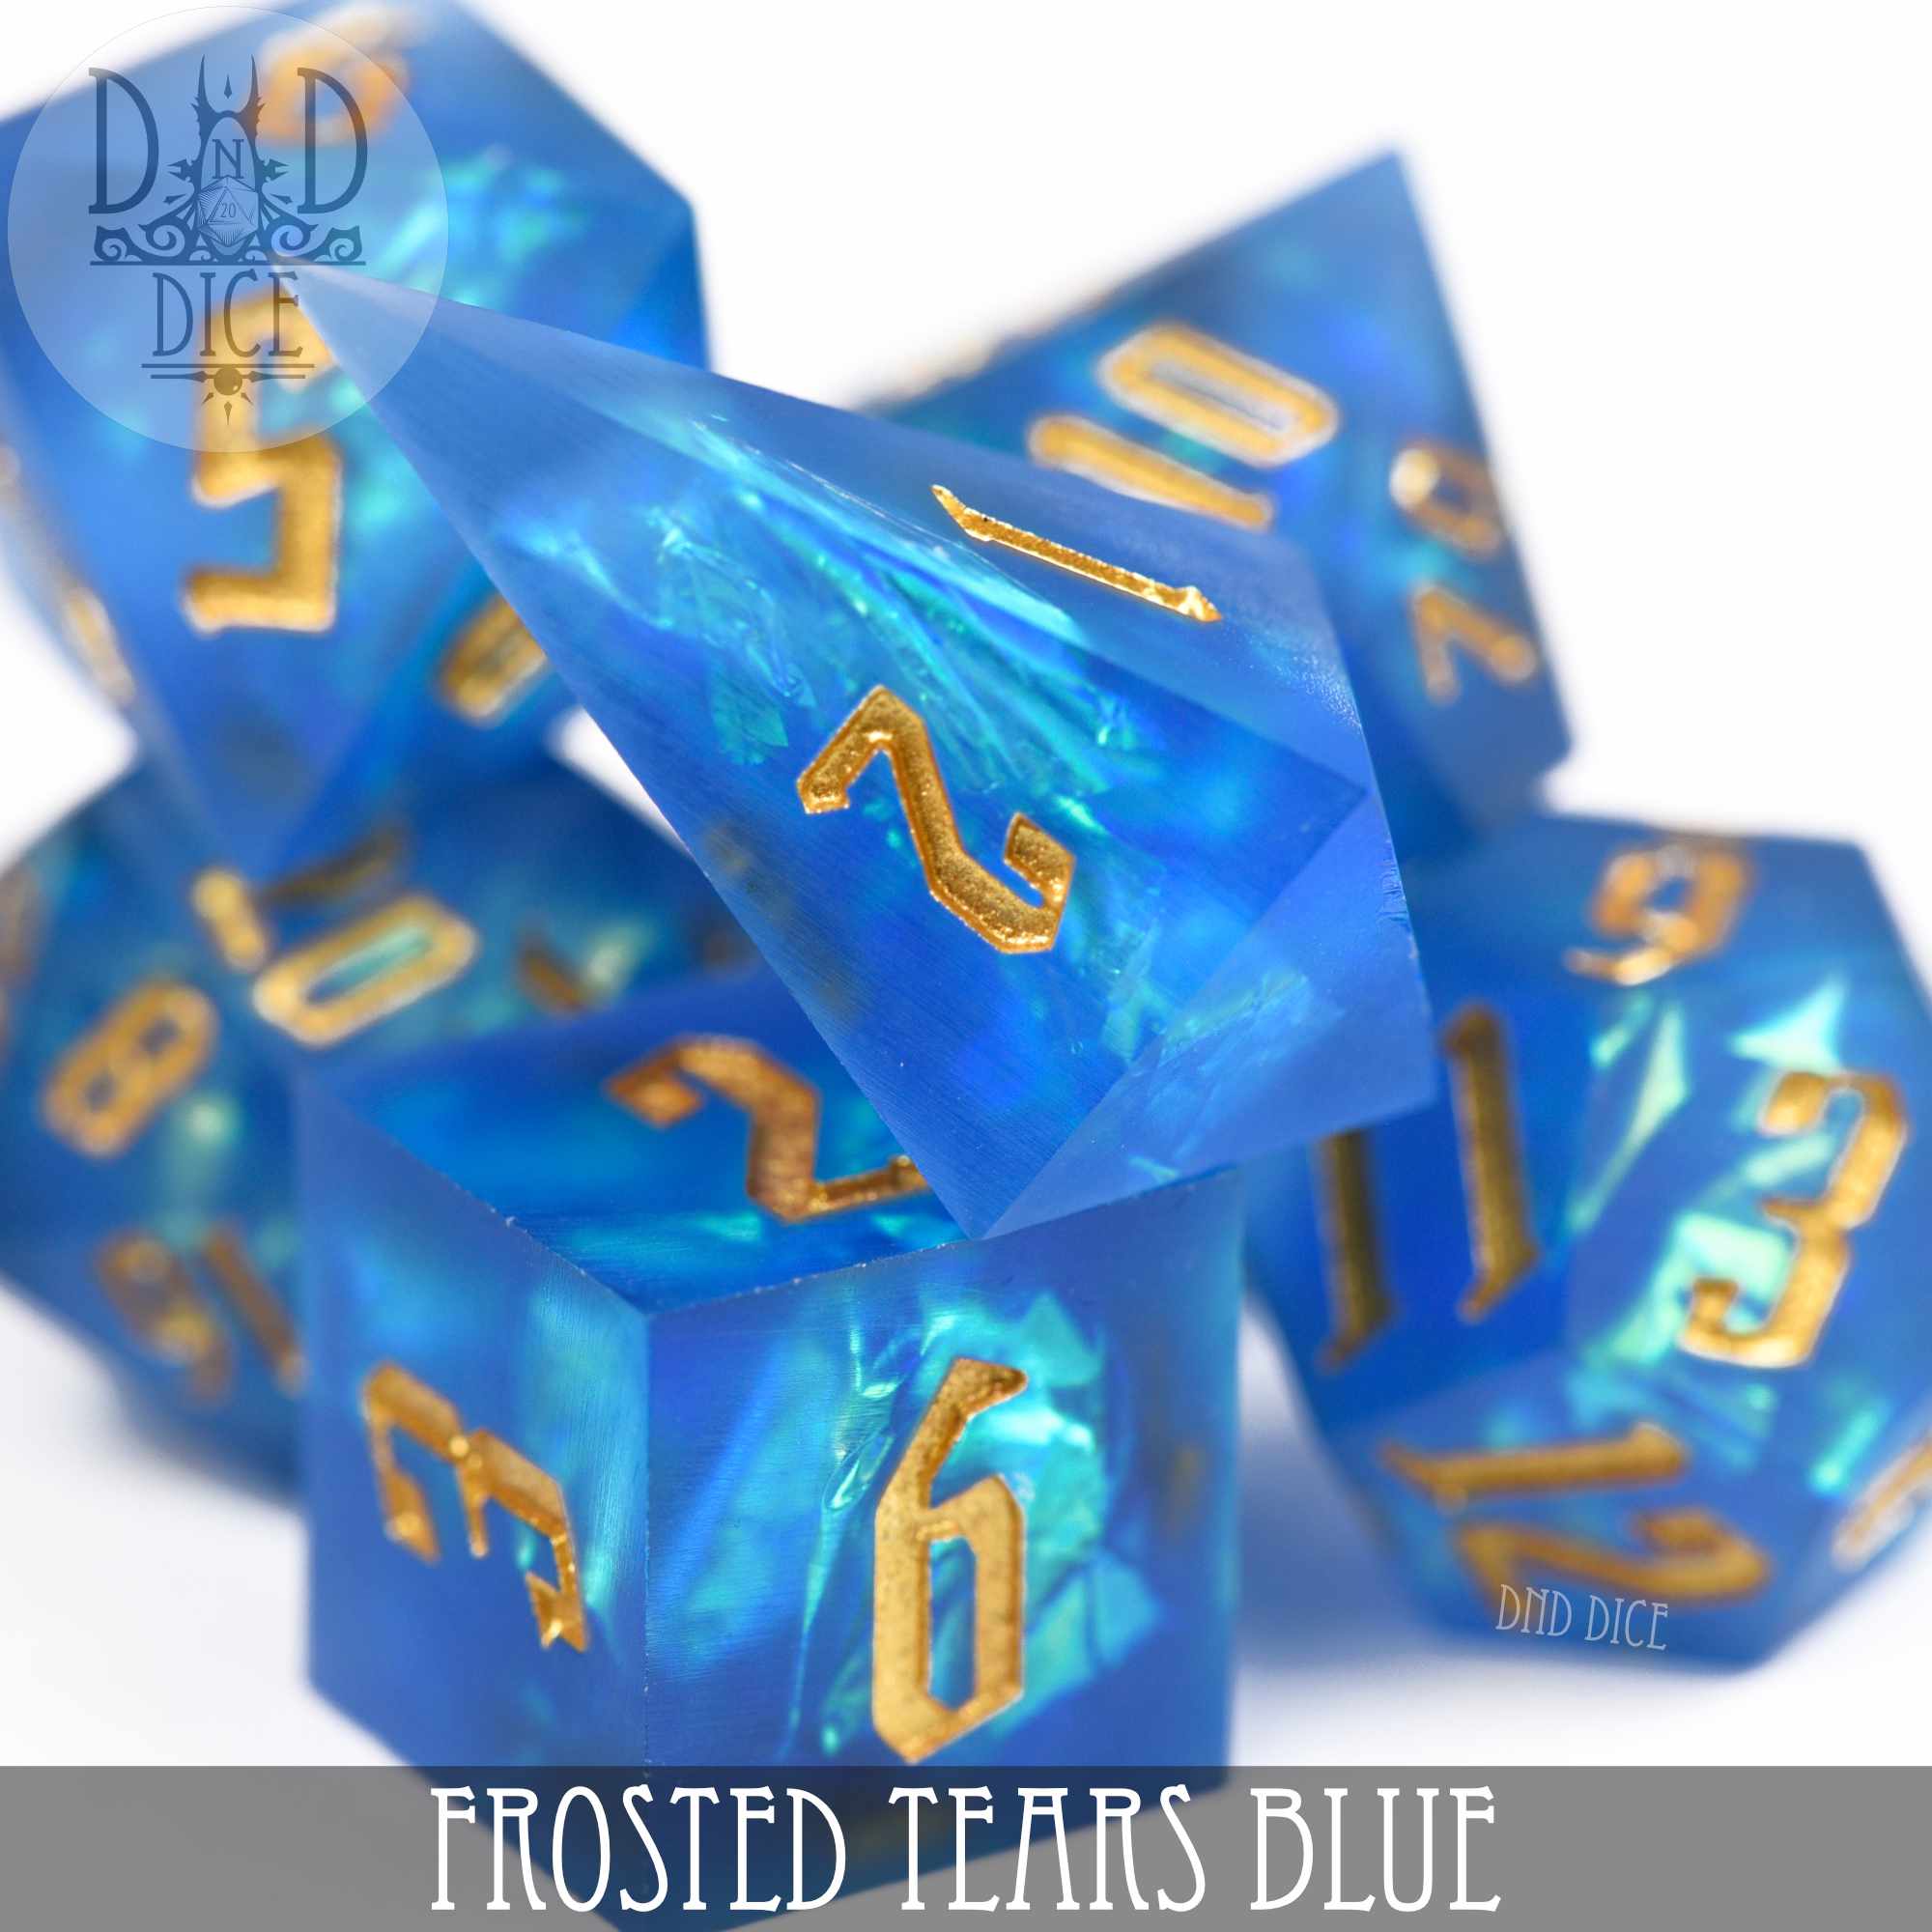 Frosted Tears Blue Handmade Dice Set